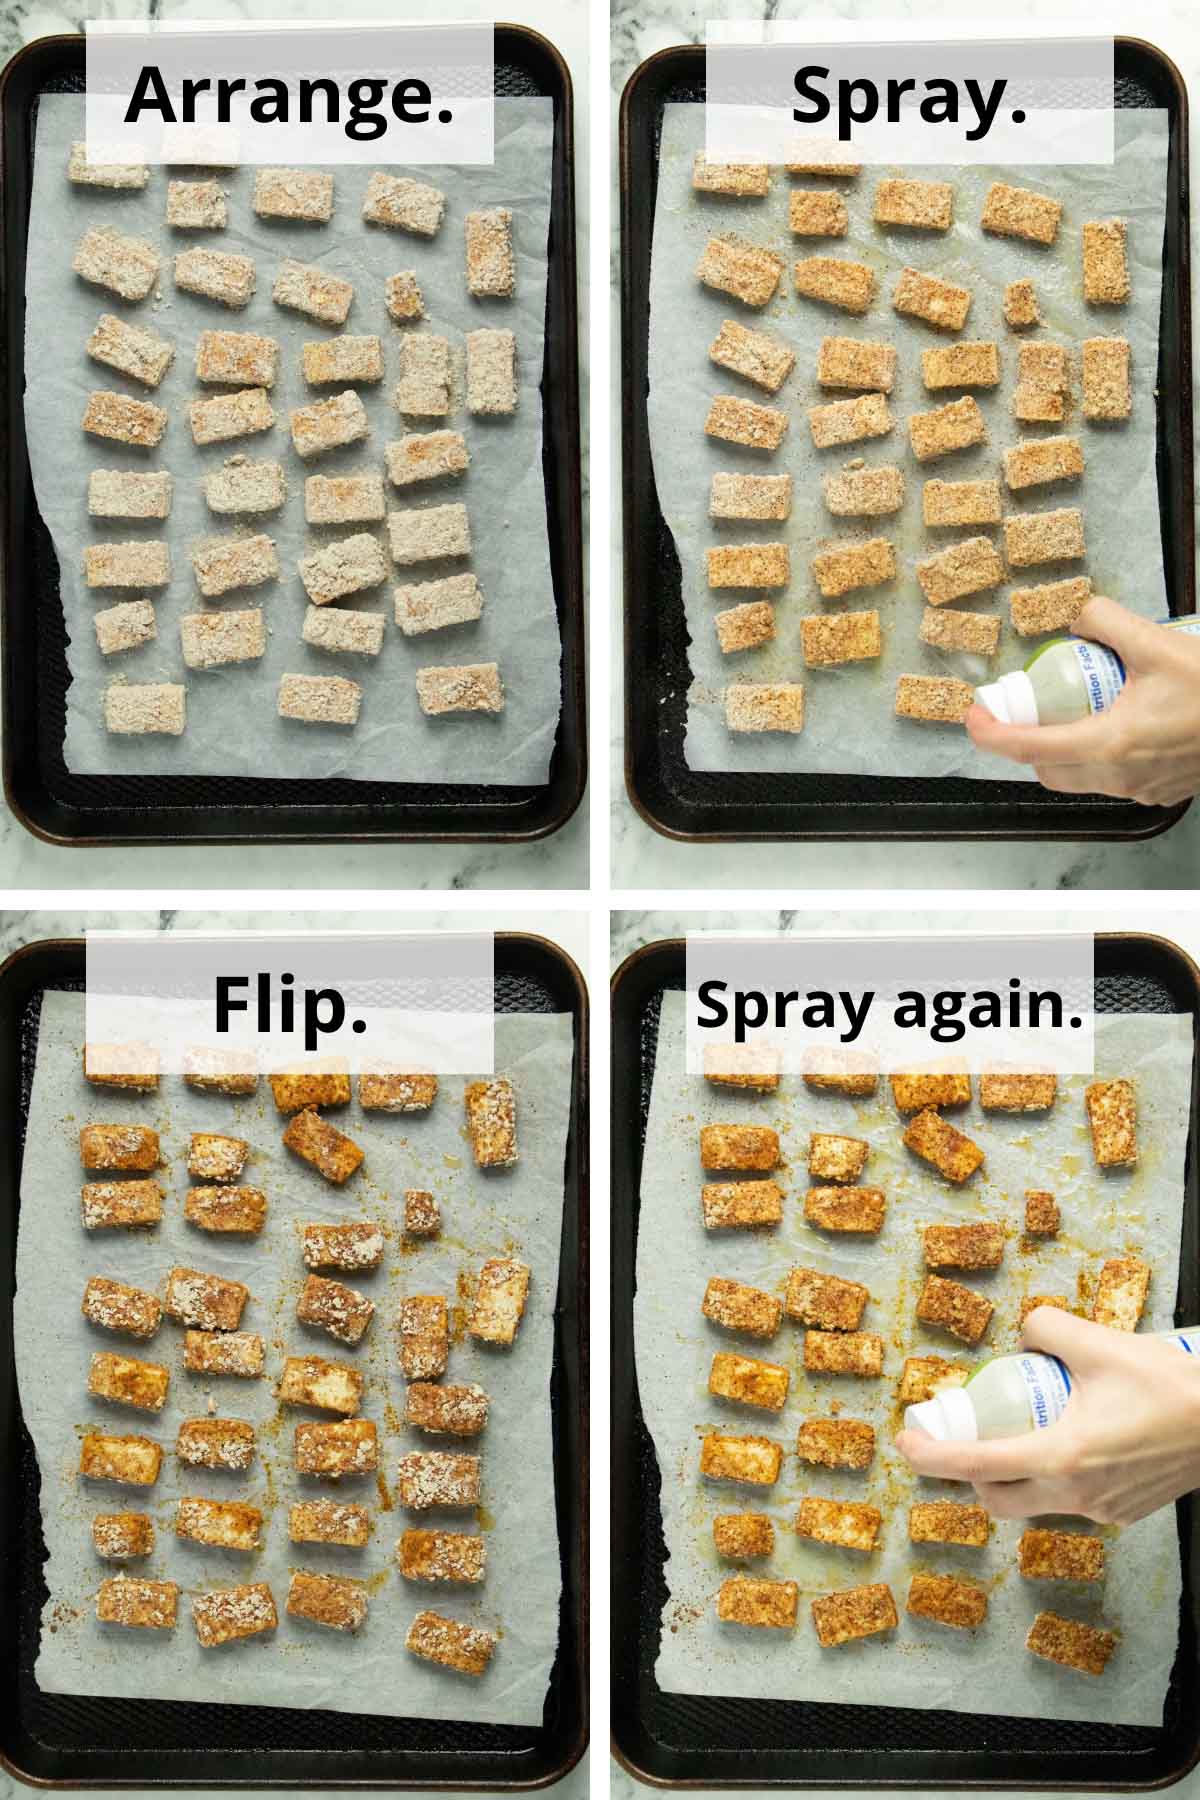 image collage showing tofu on the baking sheet, spraying it with oil, flipped tofu after baking, and the second oil spray